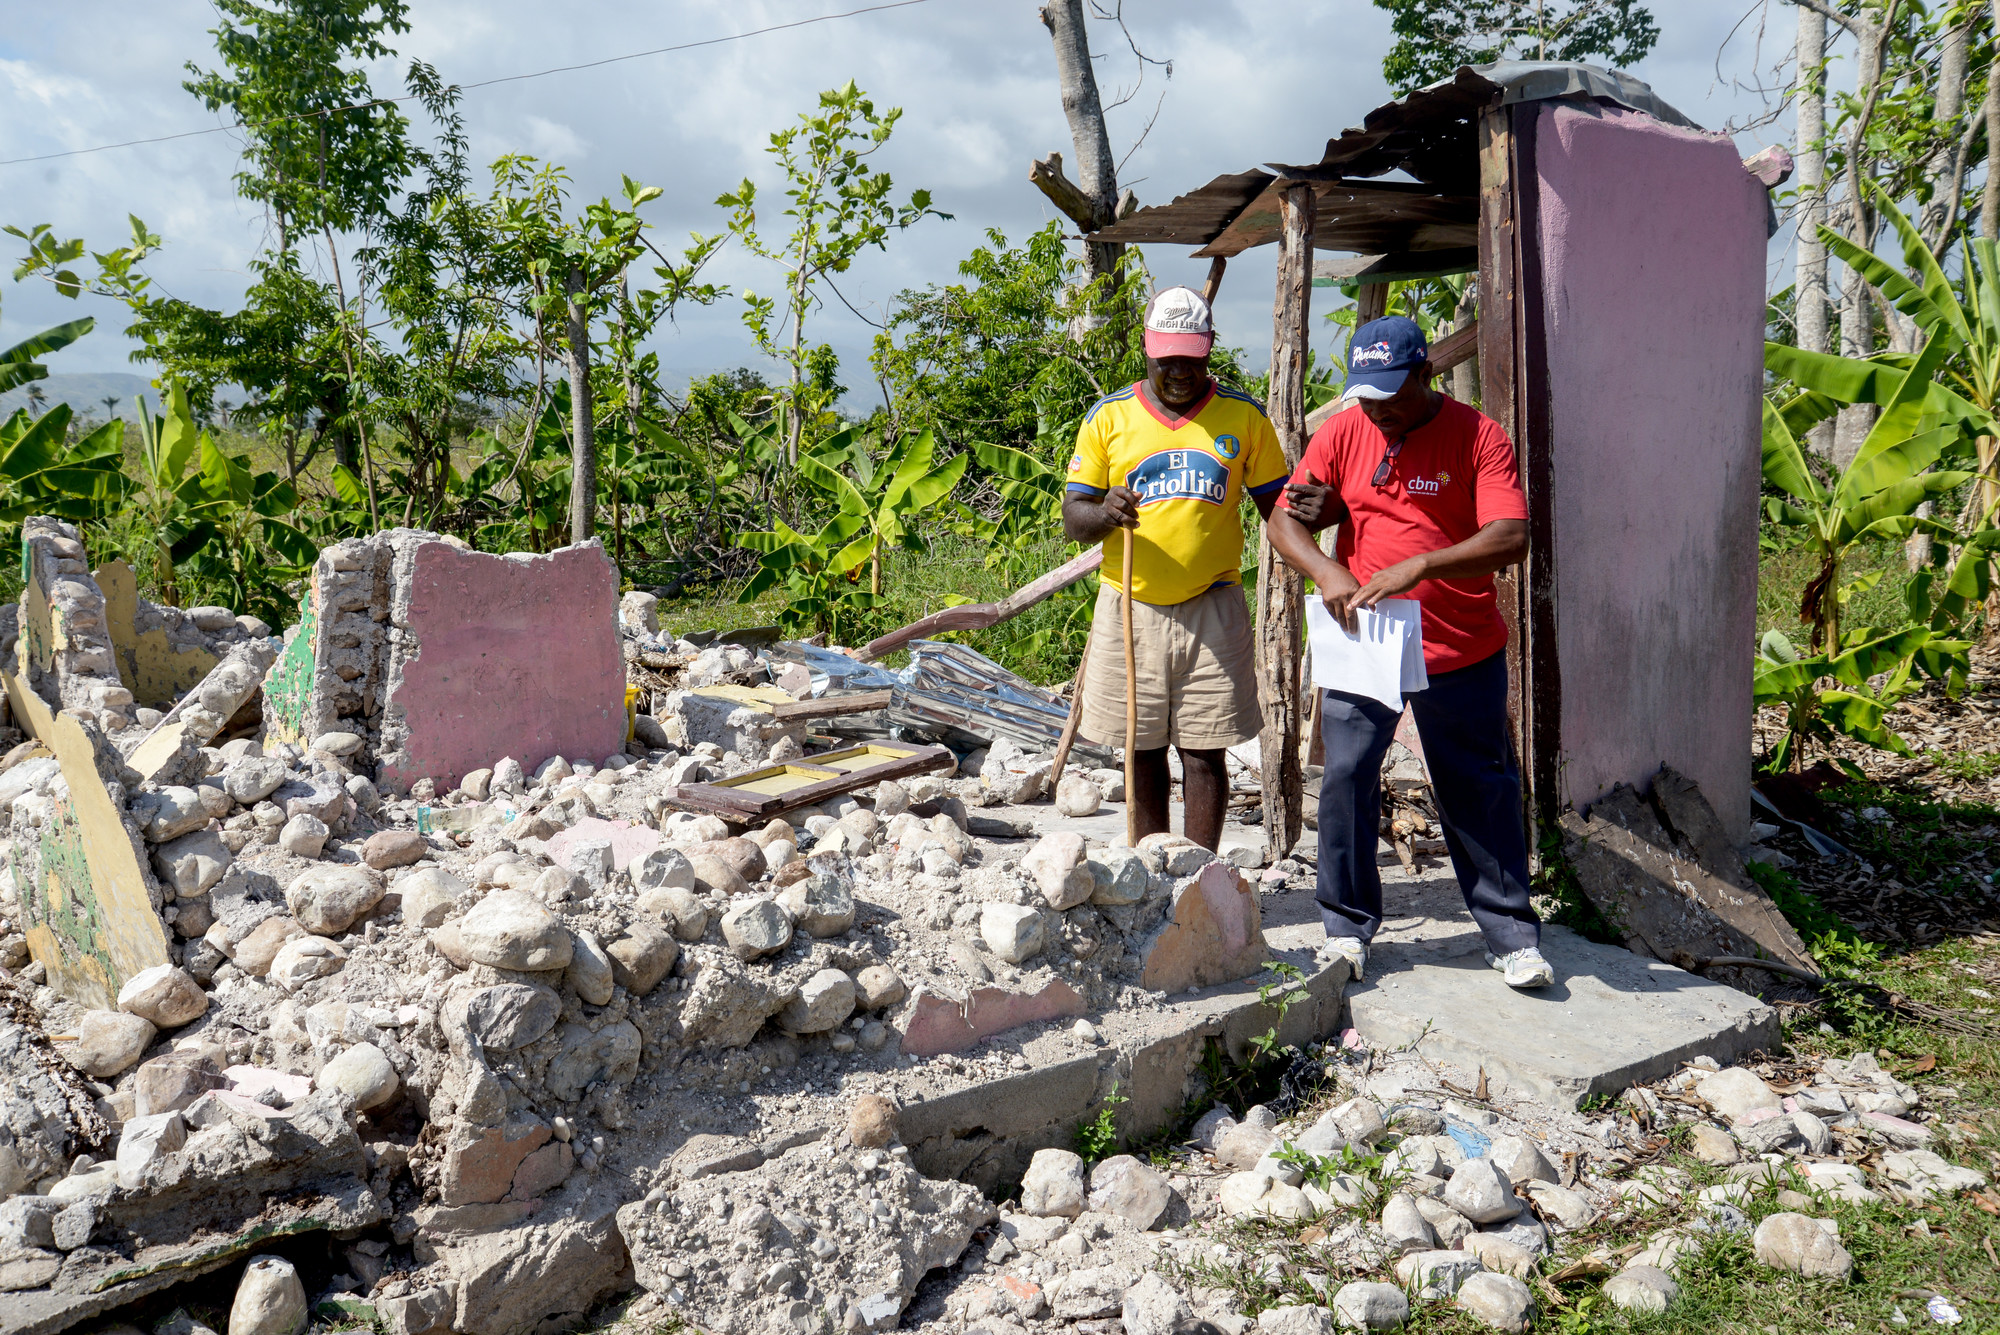 A CBM staff member helps a man walk through the rubble with his cane